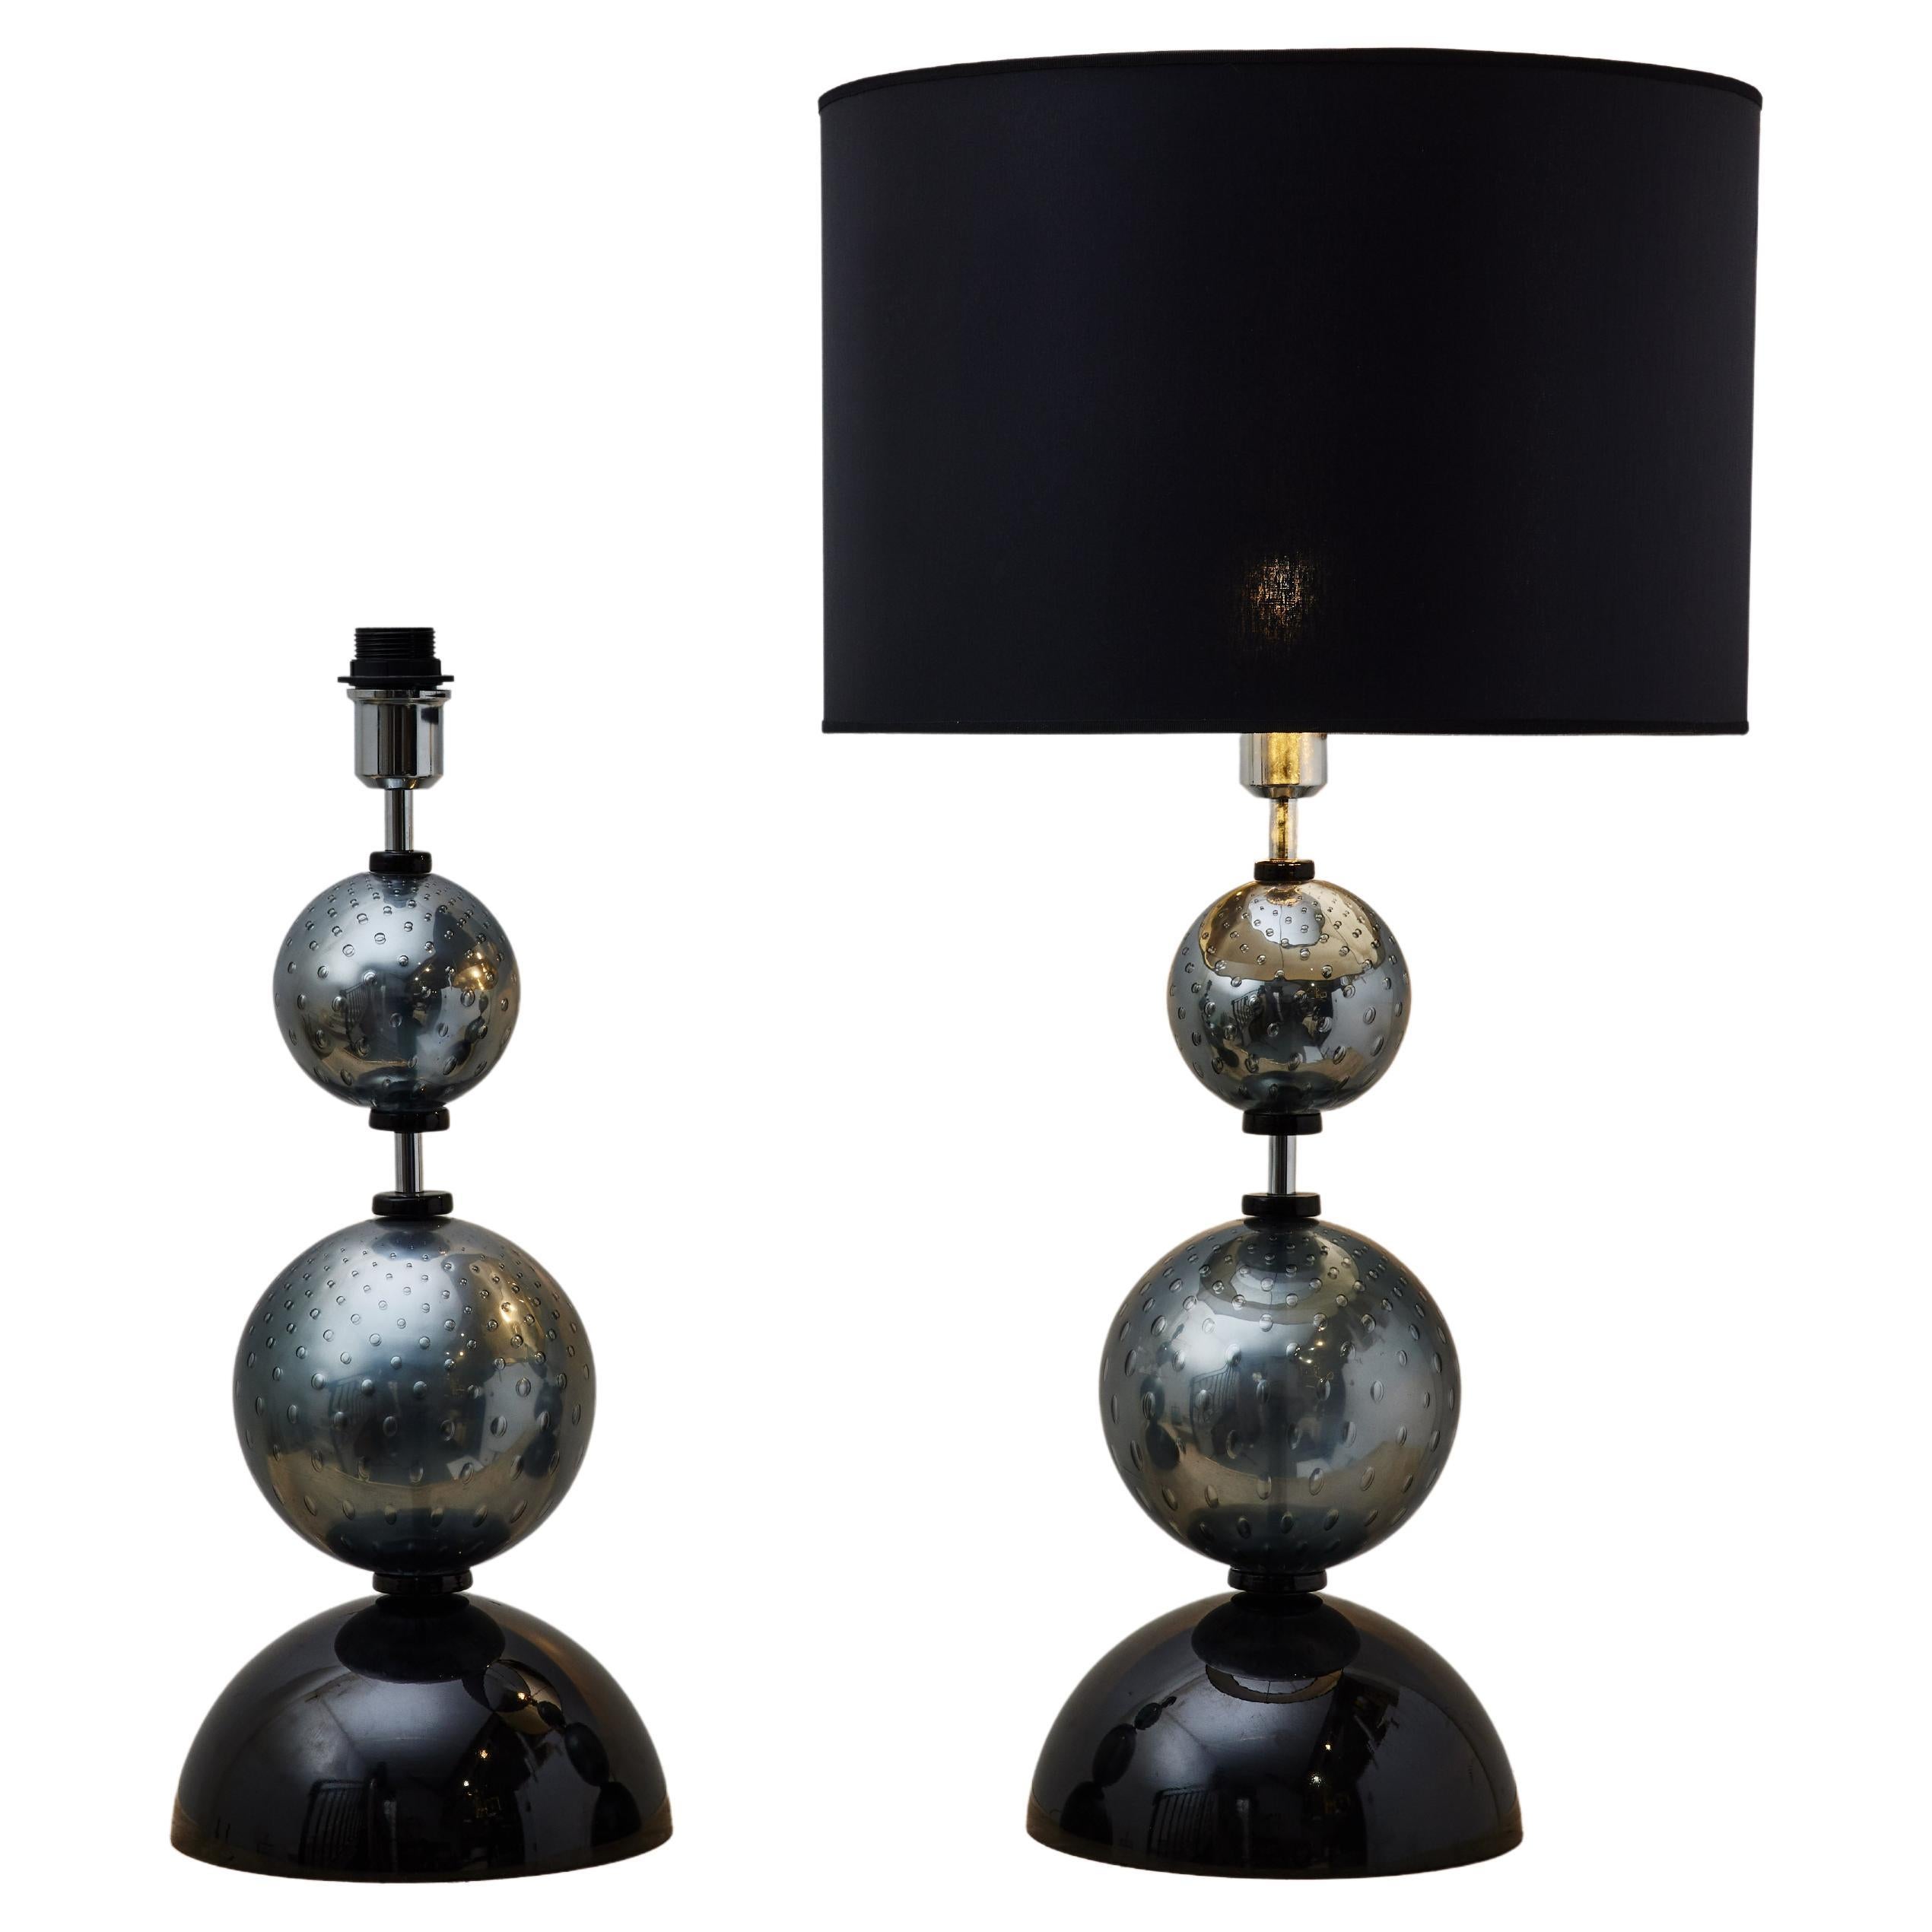 Murano Glass Lamps at Cost Price For Sale